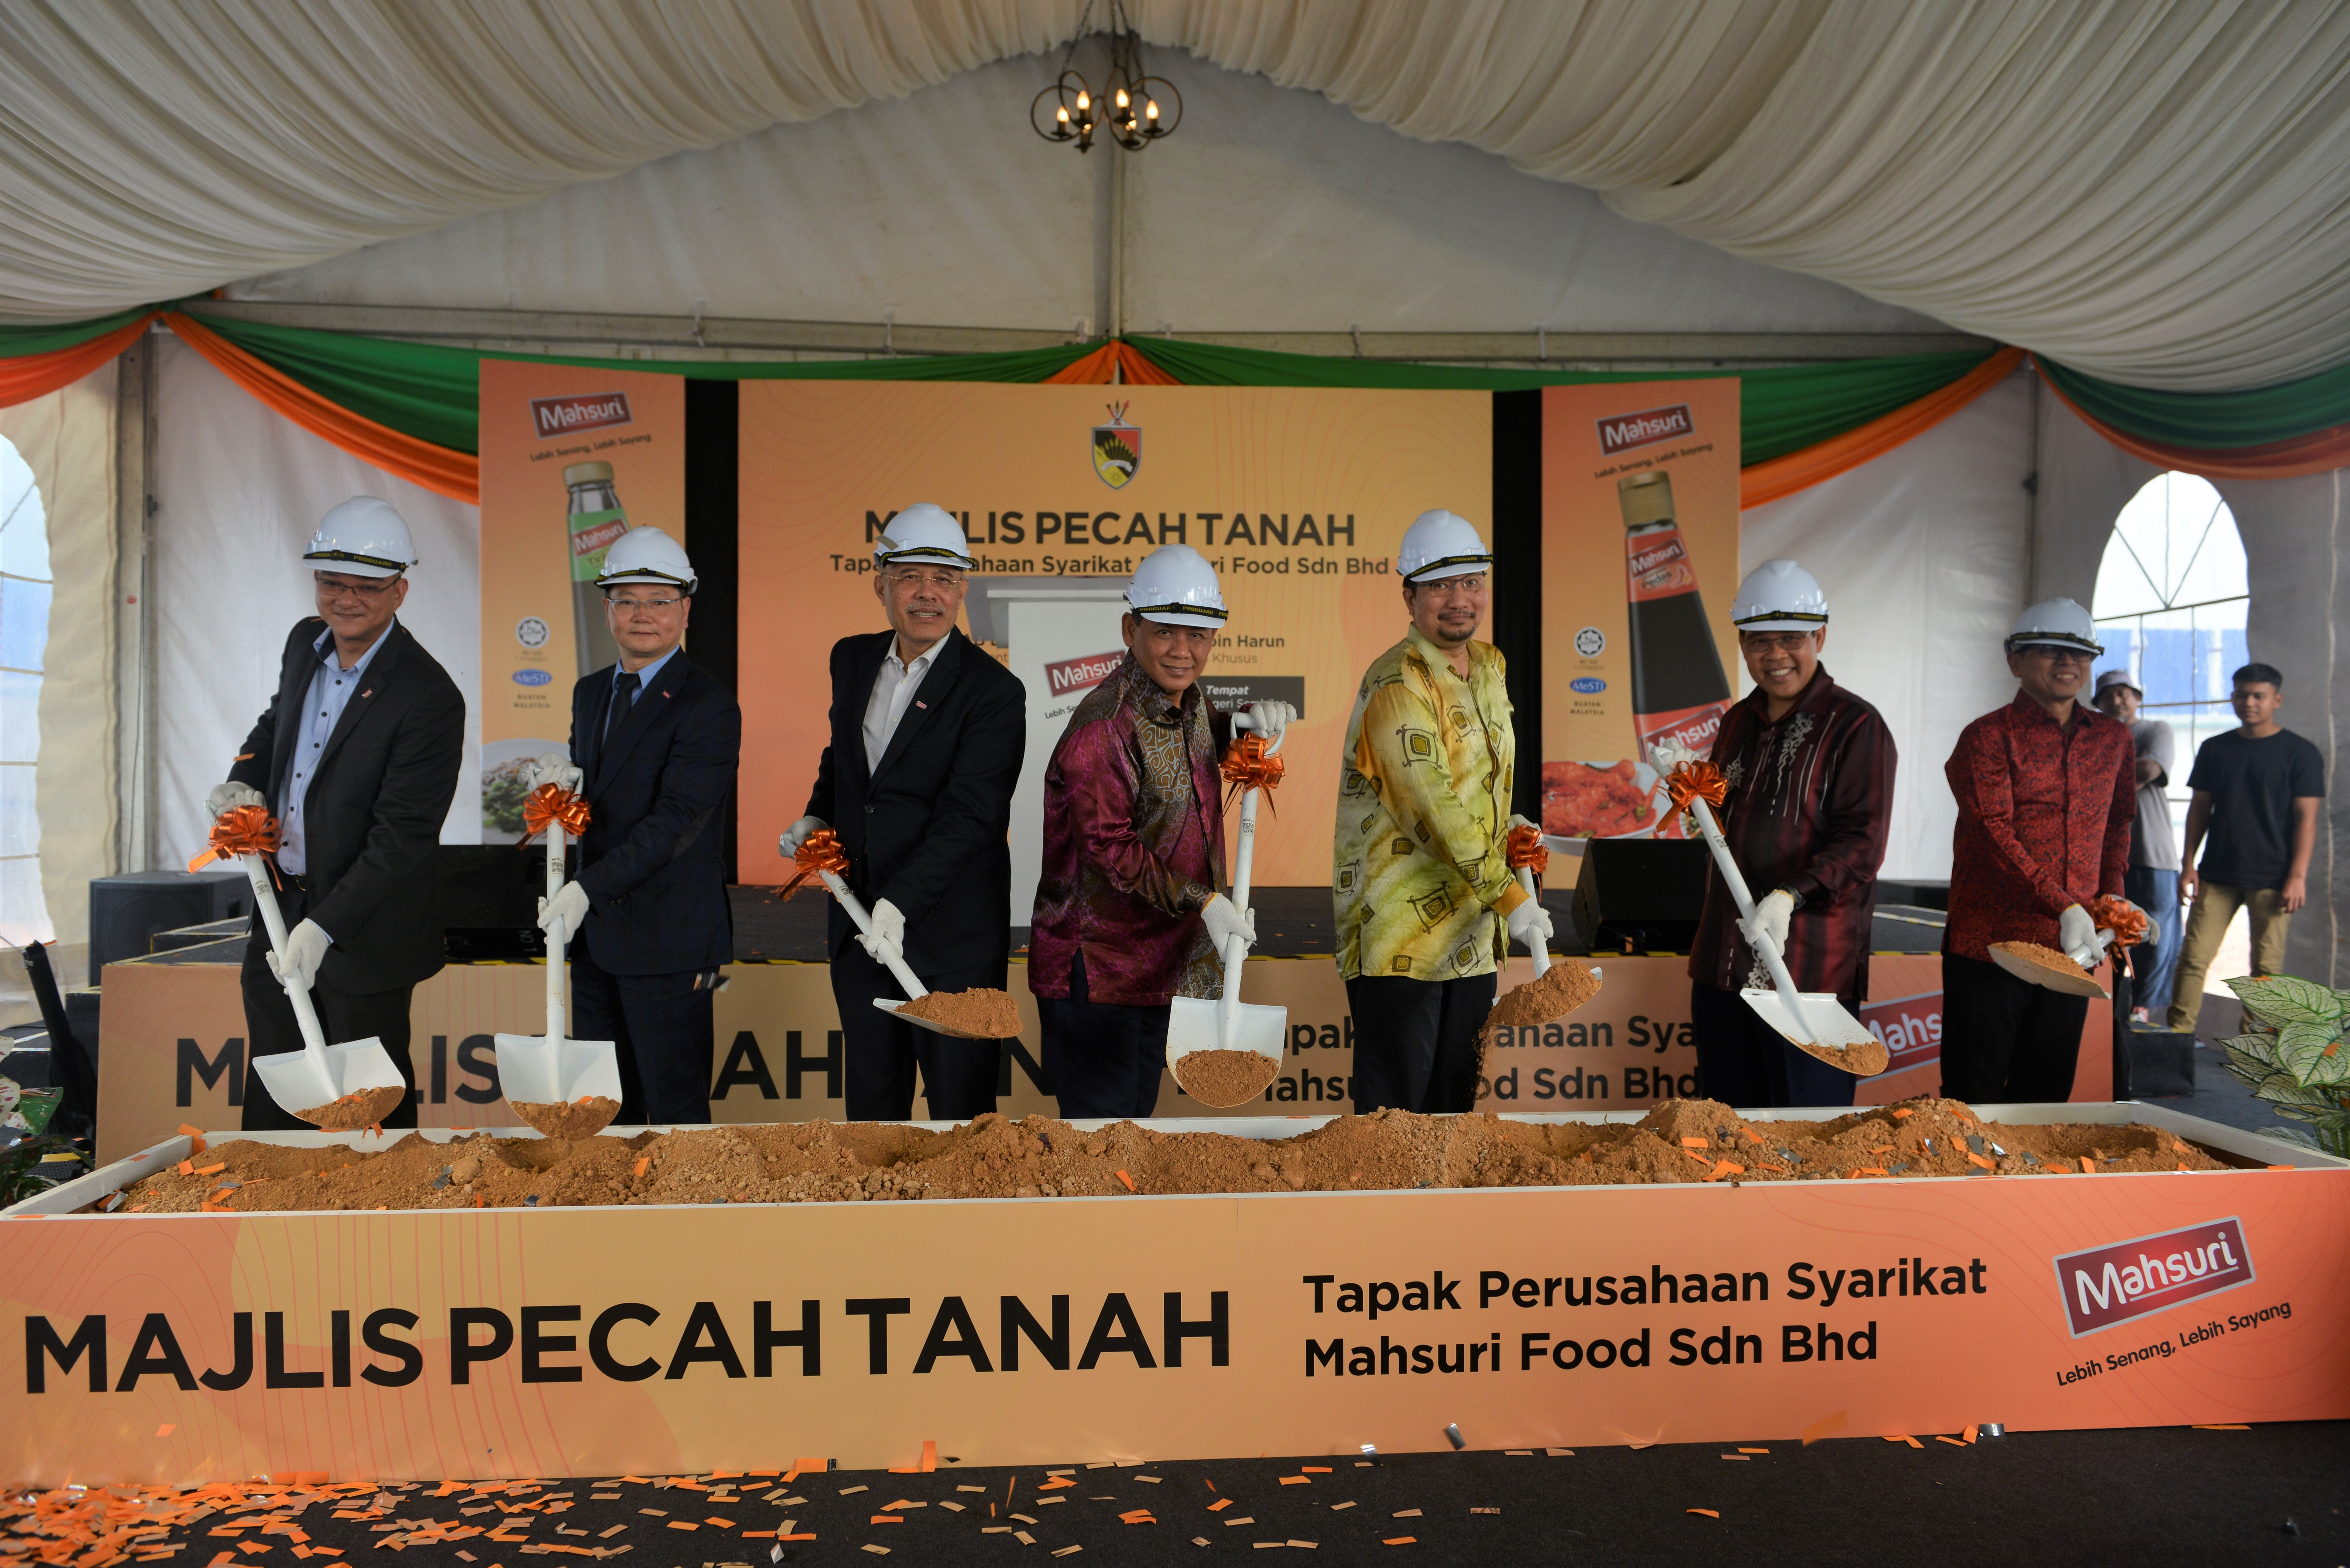 Mahsuri Food holds ground breaking ceremony for its new sauce and condiment plant in Malaysia, eyeing to expand its presence to ASEAN region and beyond.